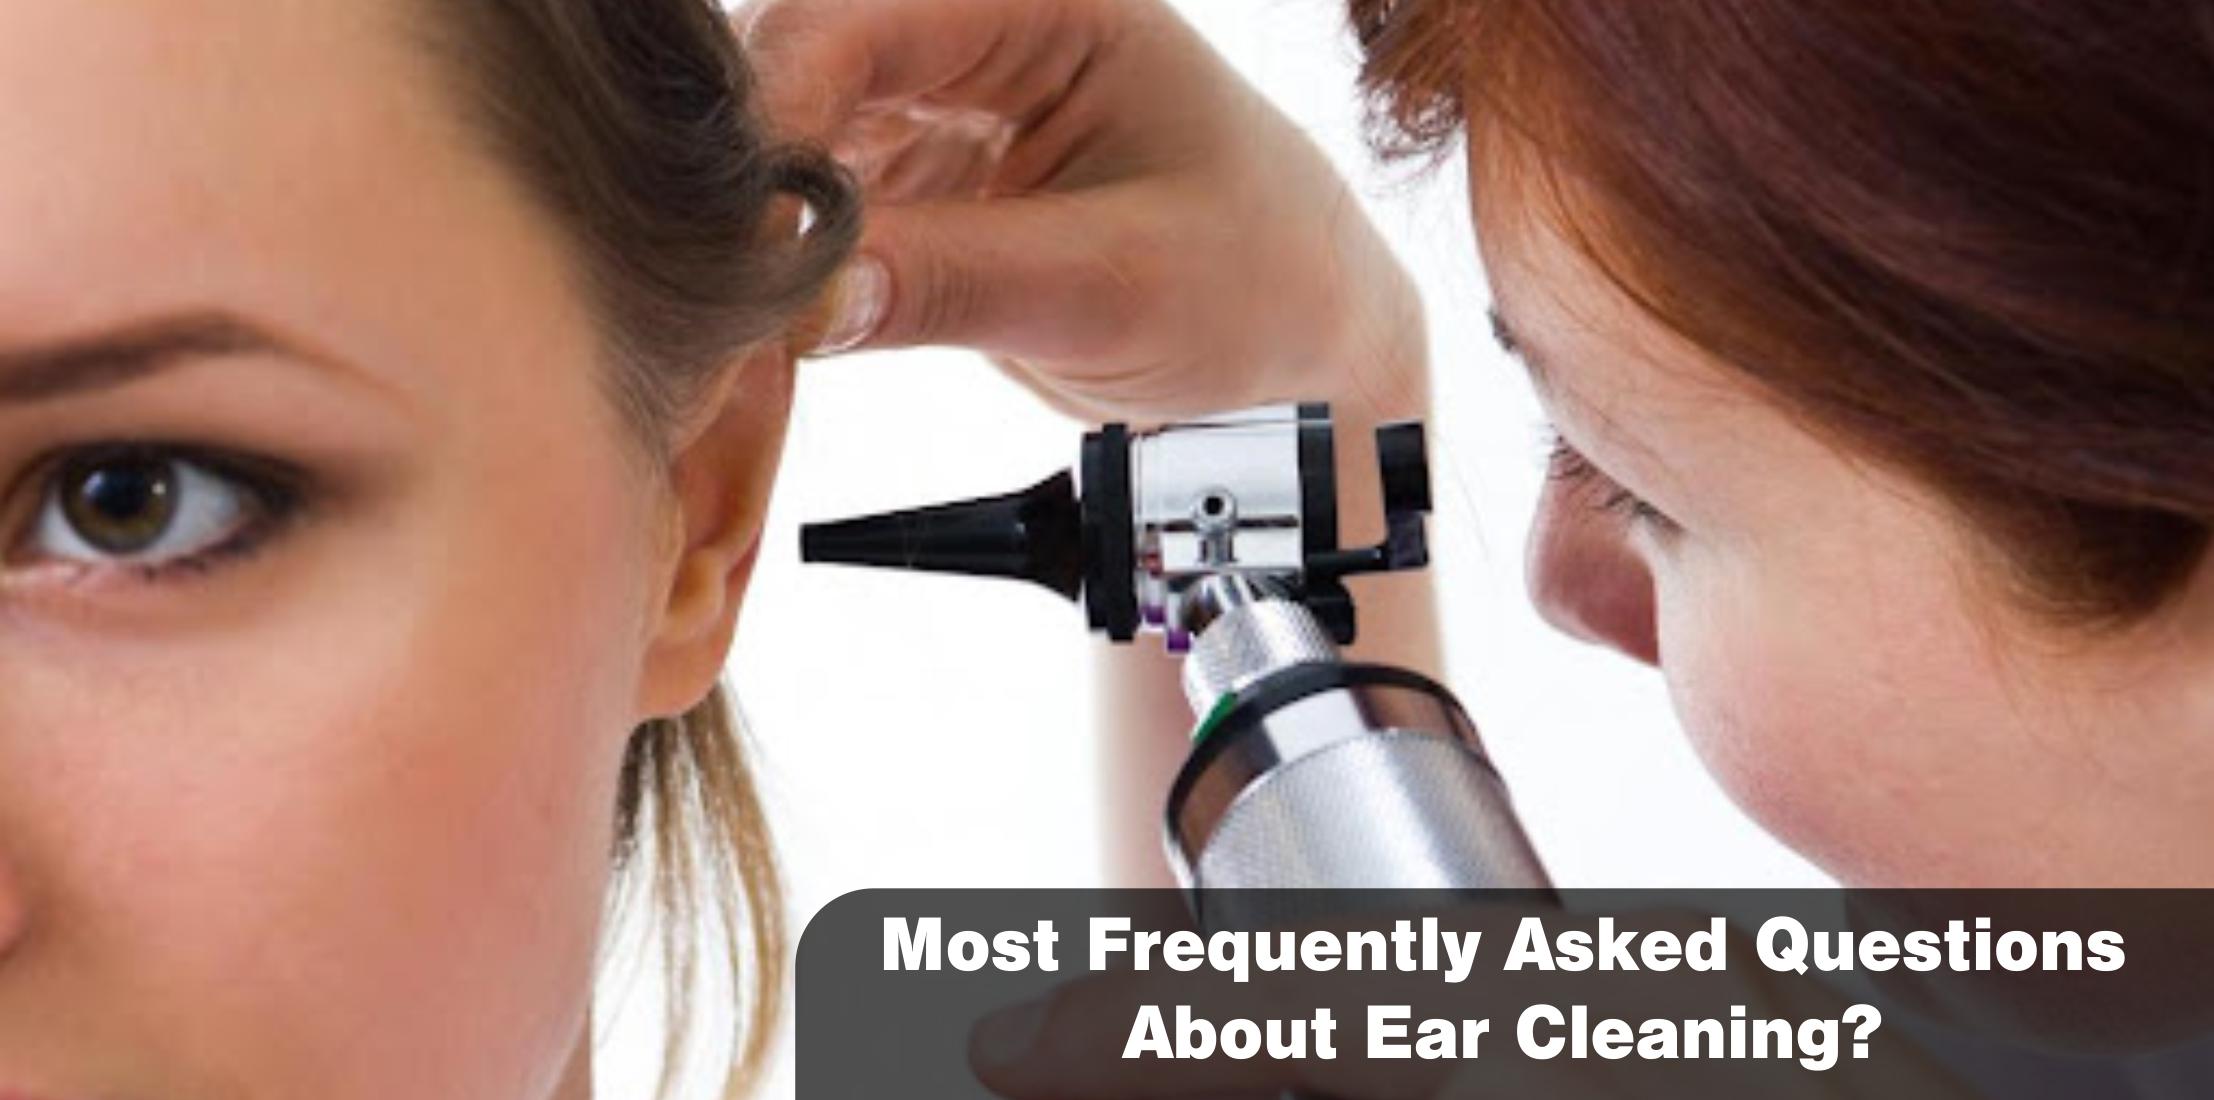 Most Frequently Asked Questions About Ear Cleaning